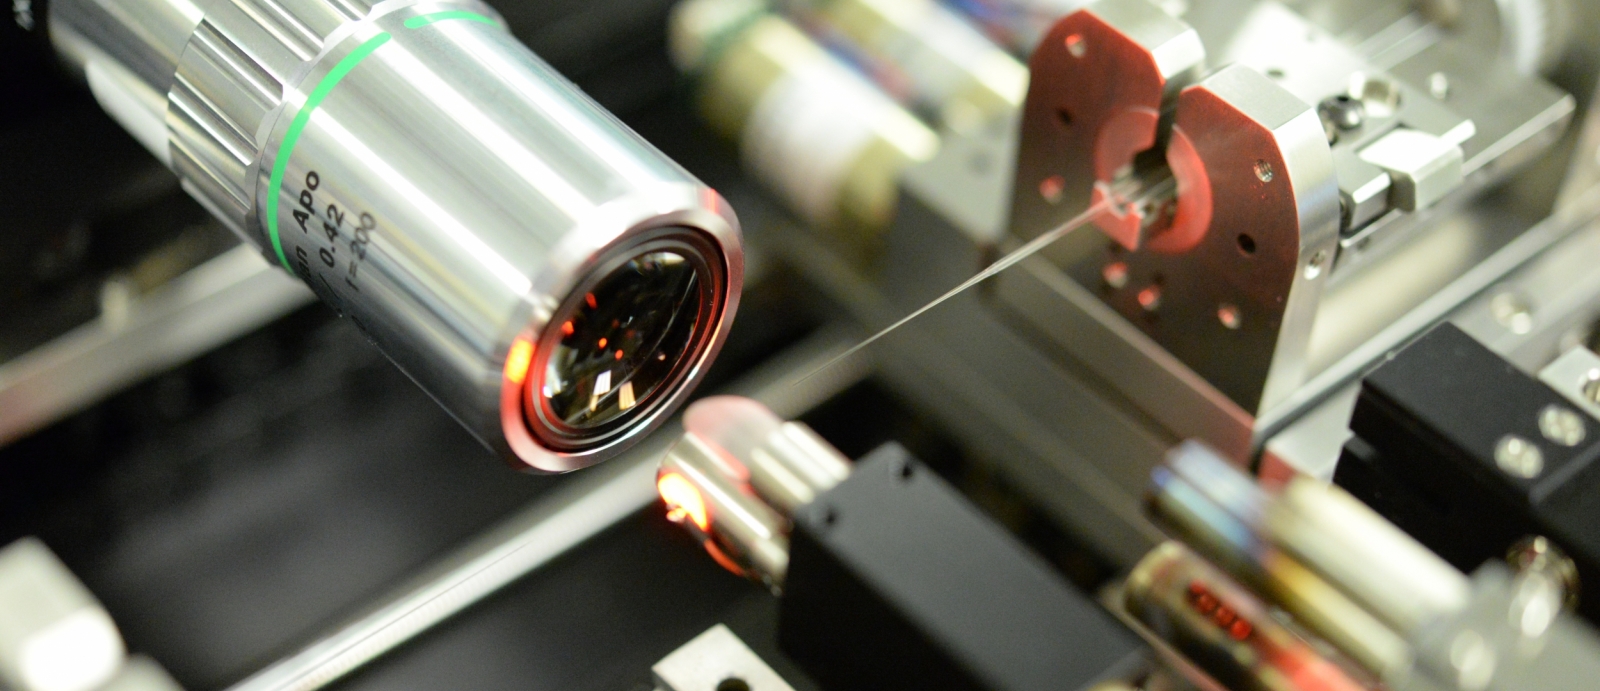 The tip of a photonic lantern is inspected with a microscope objective prior to the lantern’s being spliced to the high-power kW-class fiber. 